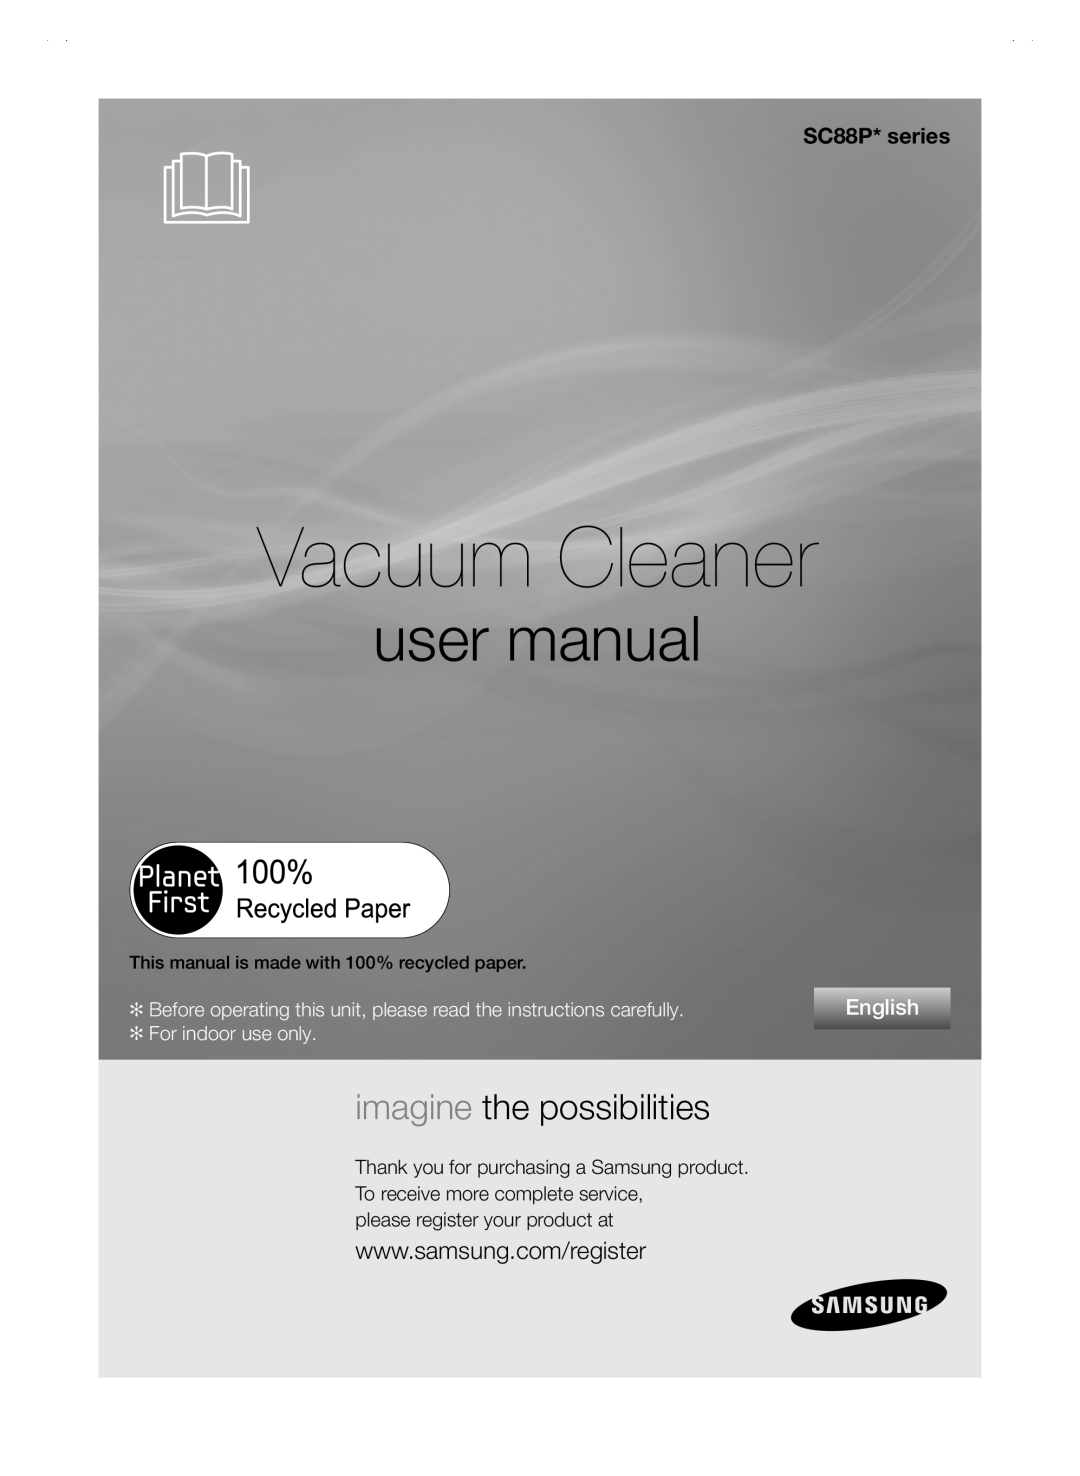 Samsung user manual Vacuum Cleaner, imagine the possibilities, SC88P* series, English, For indoor use only 